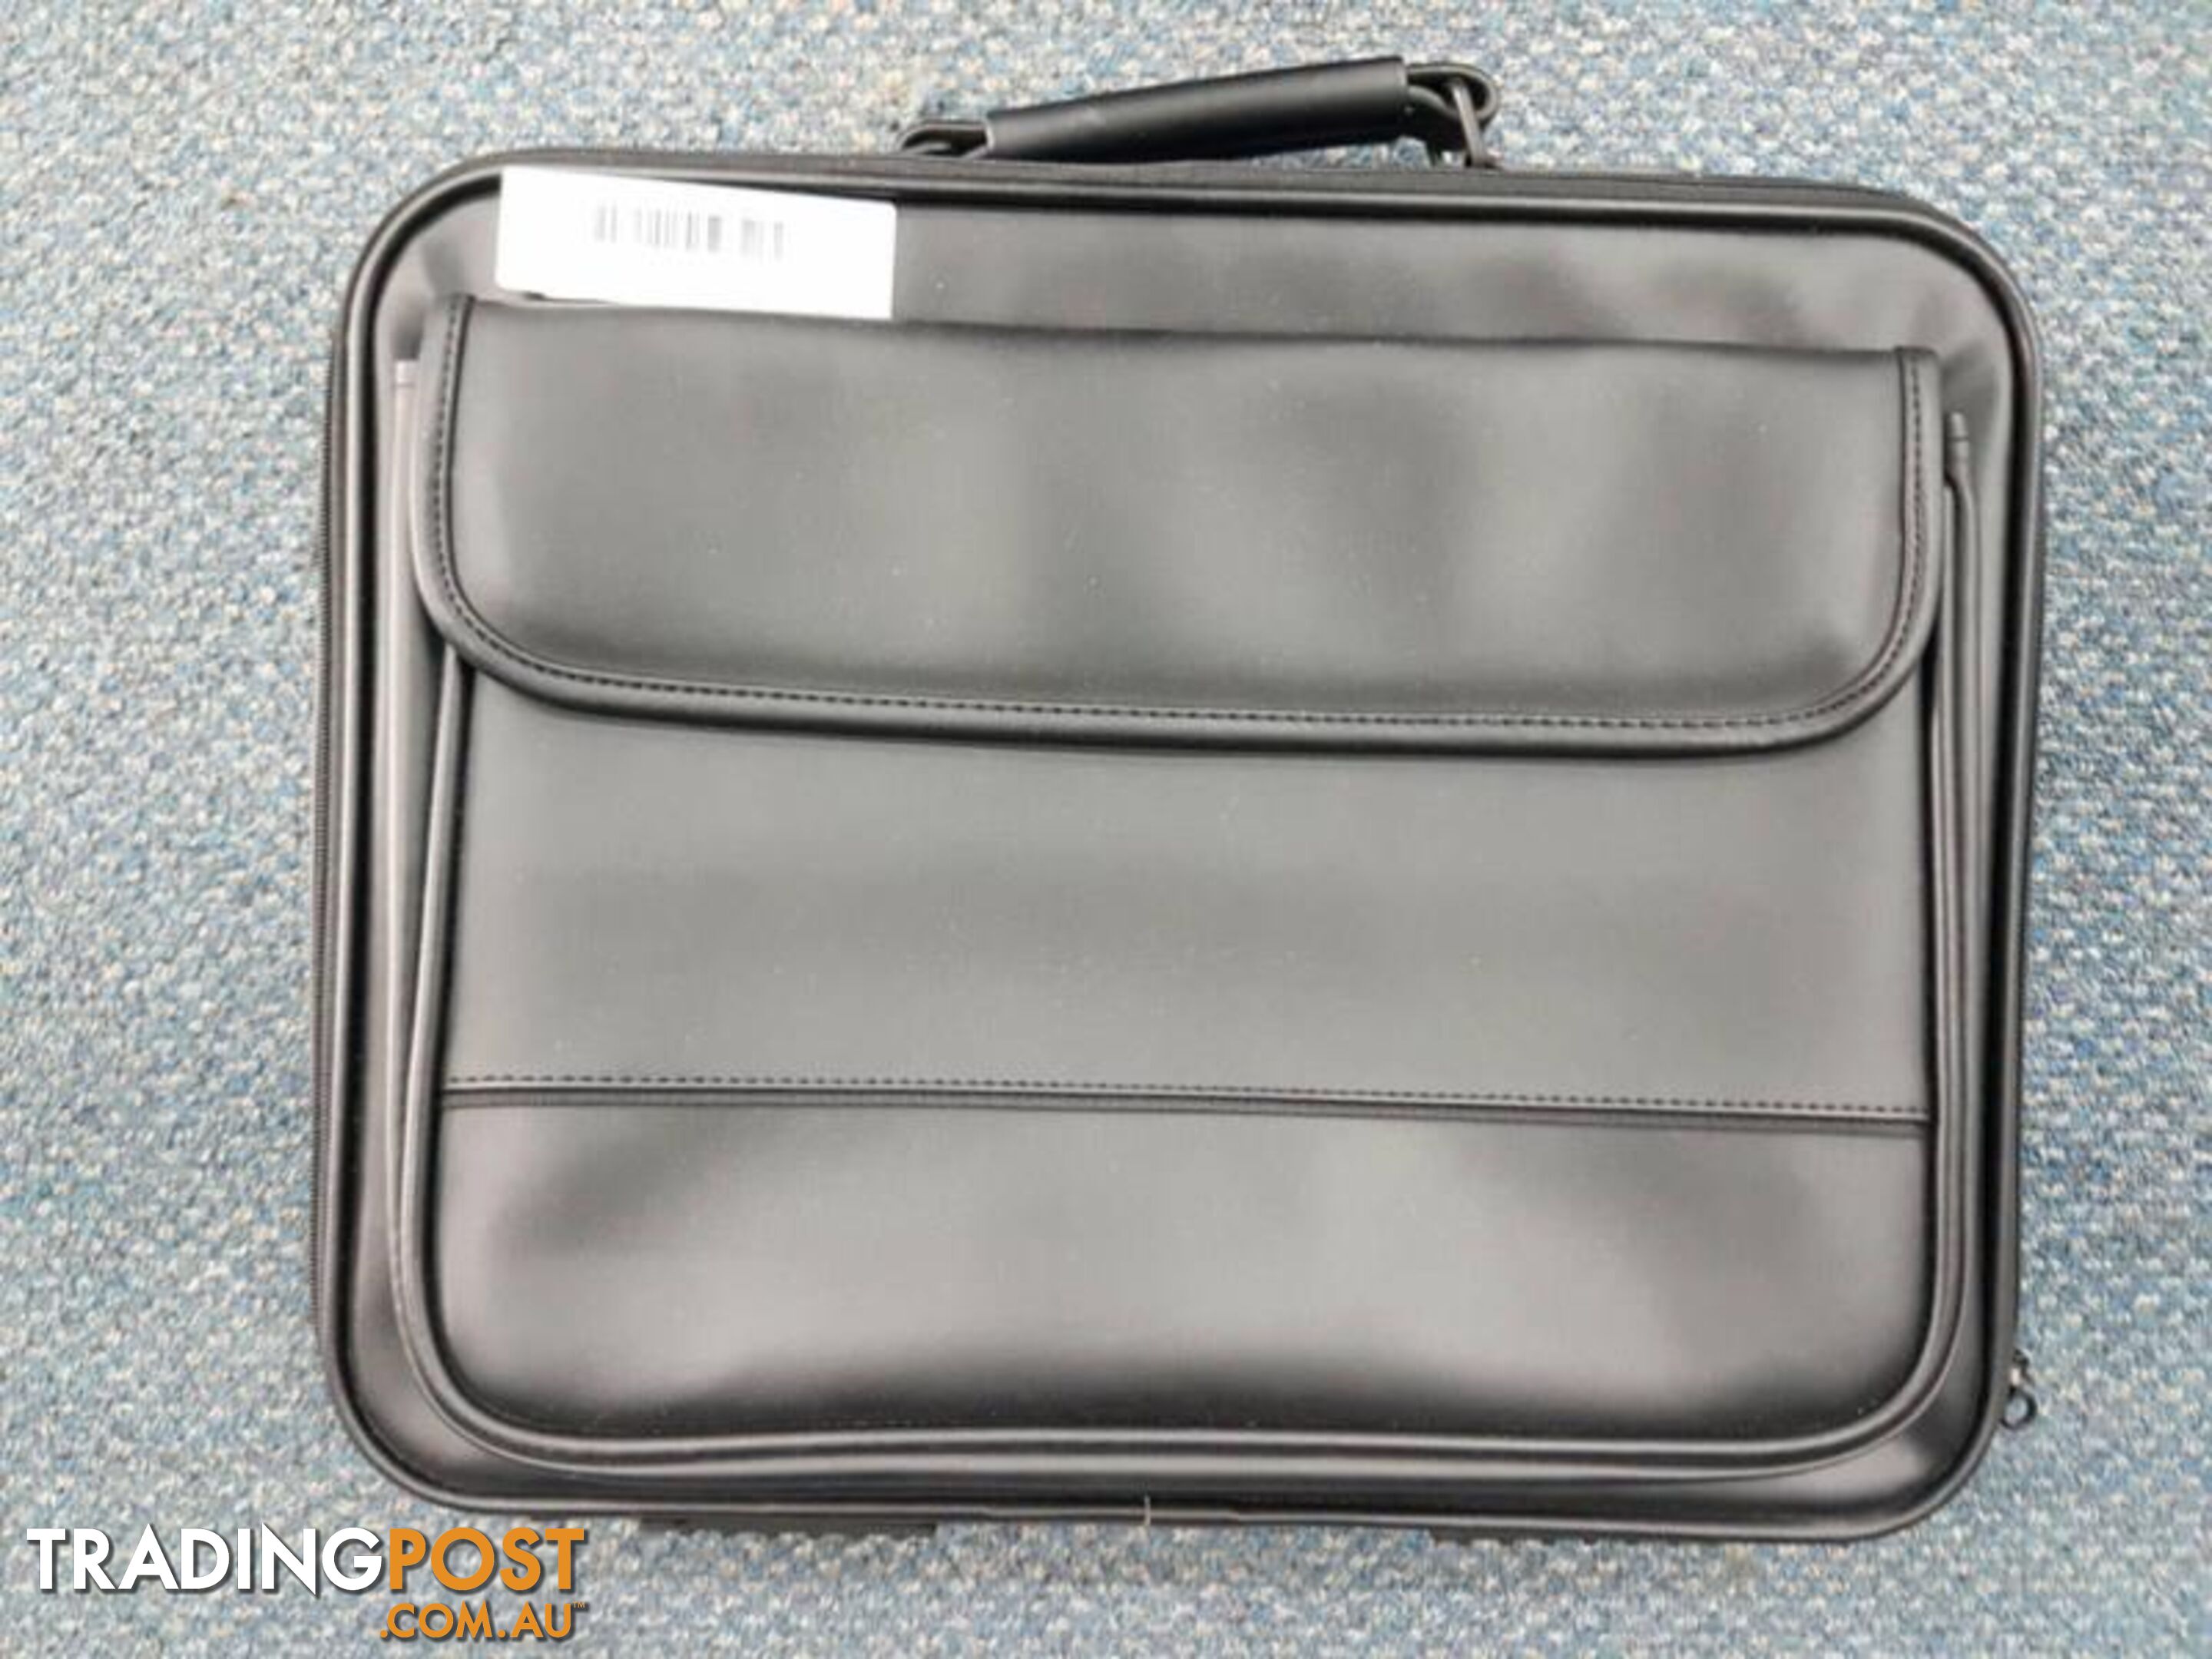 LAPTOP BAGS 12" - 17" From $20